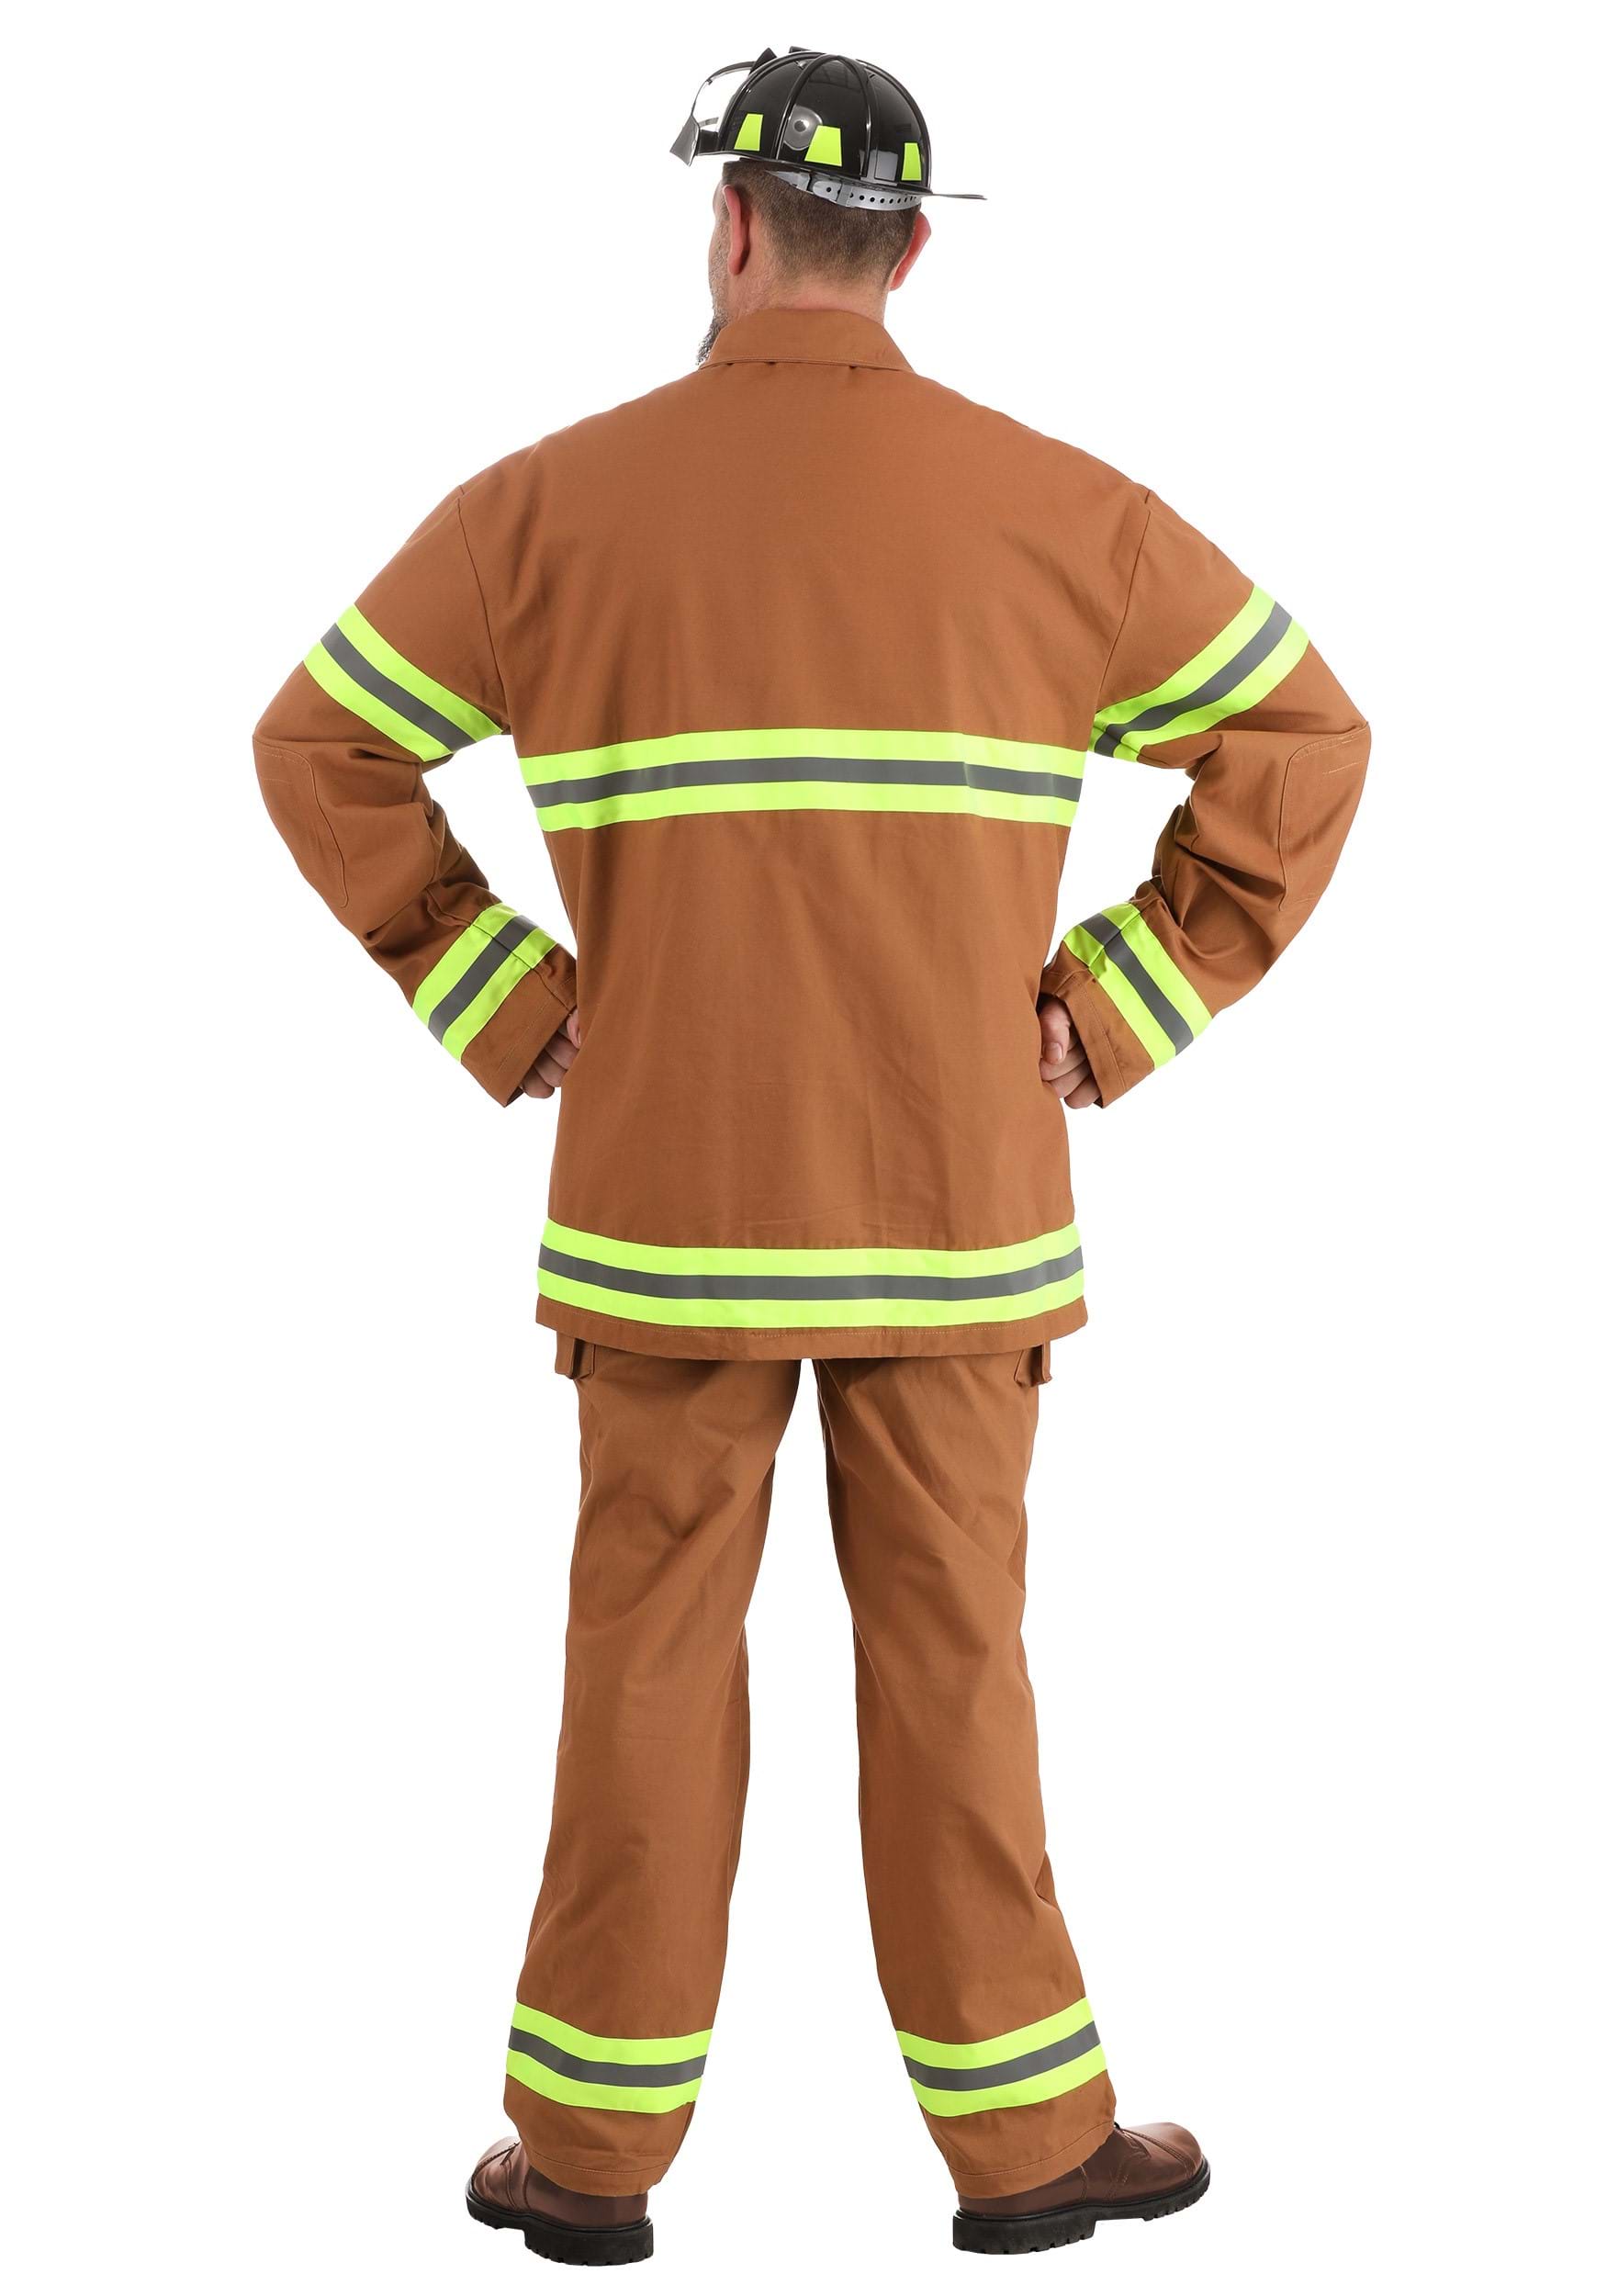 Firefighter Adult Costume